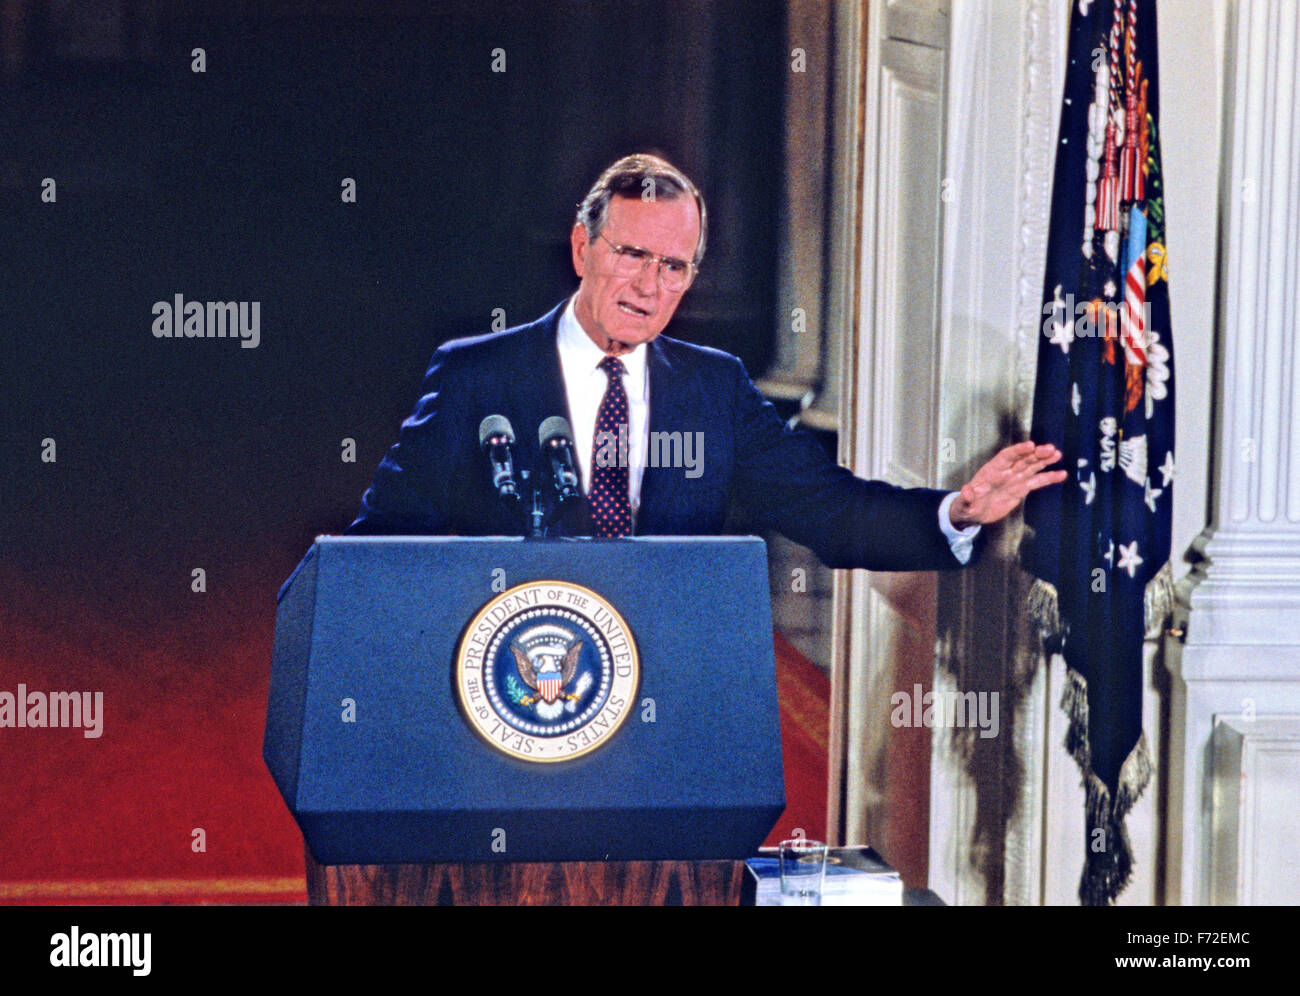 United States President George H.W. Bush holds a press conference in the East Room of the White House in Washington, DC on June 4, 1992. In his opening remarks the President discussed the budget deficit and advocated for a balanced budget amendment to the US Constitution. Credit: Ron Sachs/CNP - NO WIRE SERVICE - Stock Photo